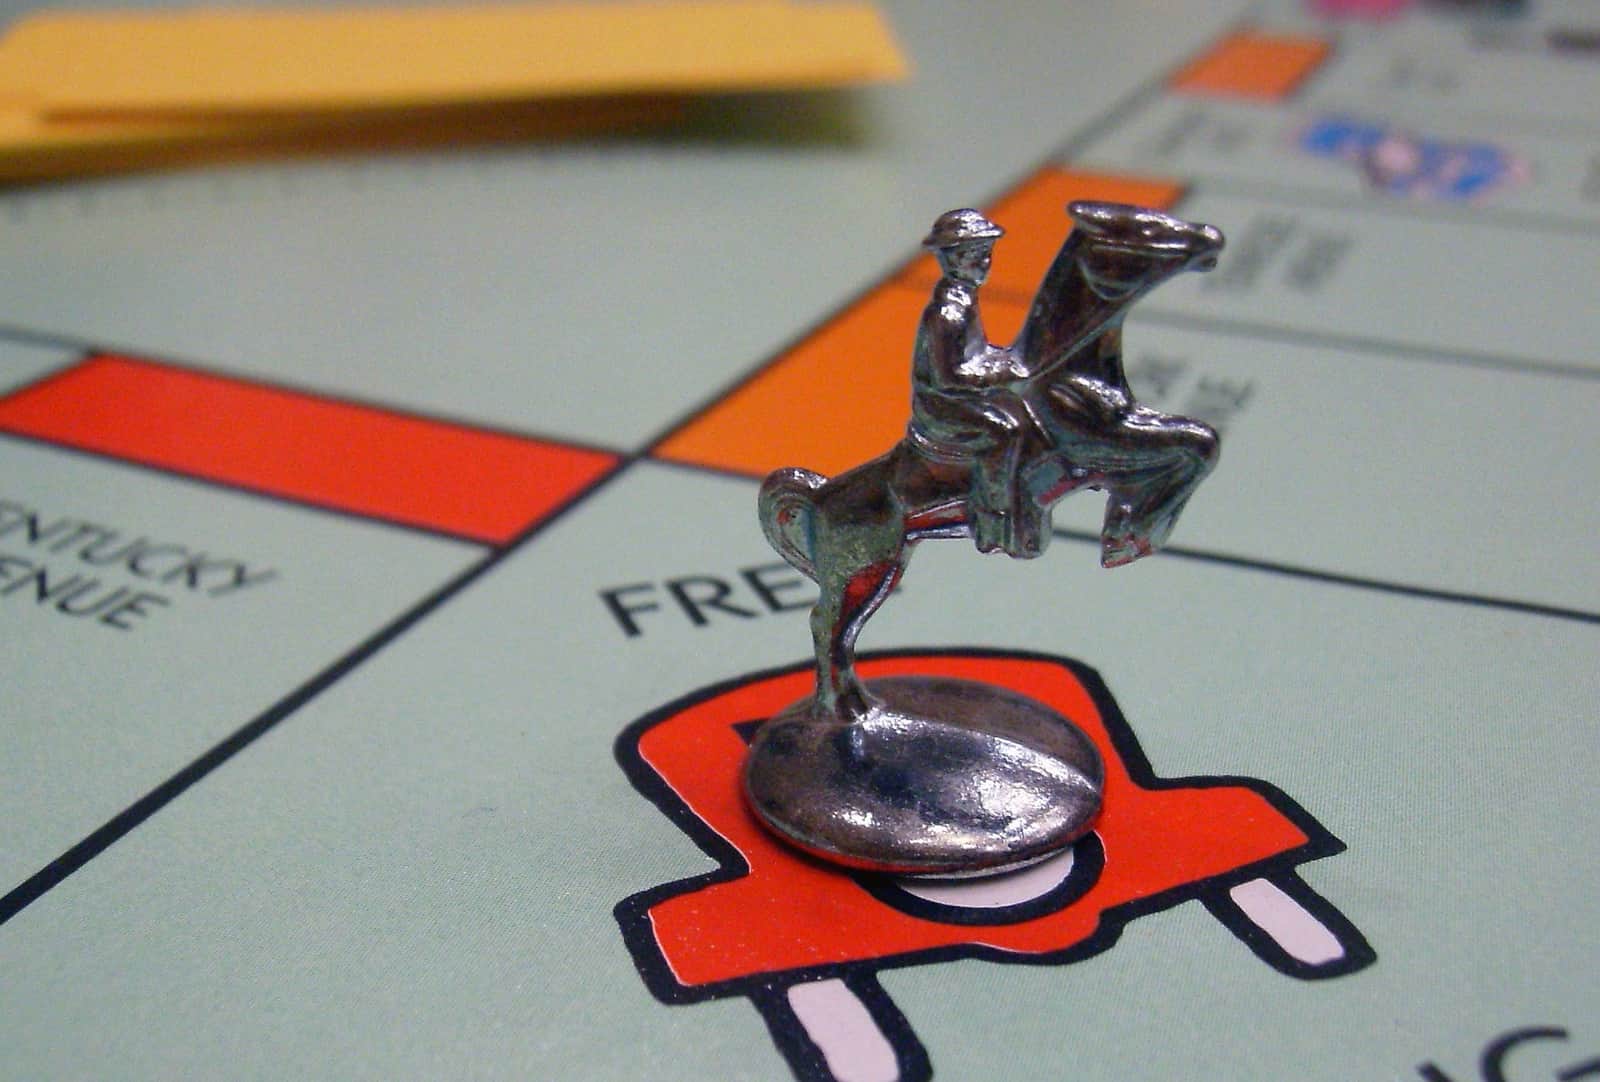 Monopoly horse and rider piece on Free Parking space